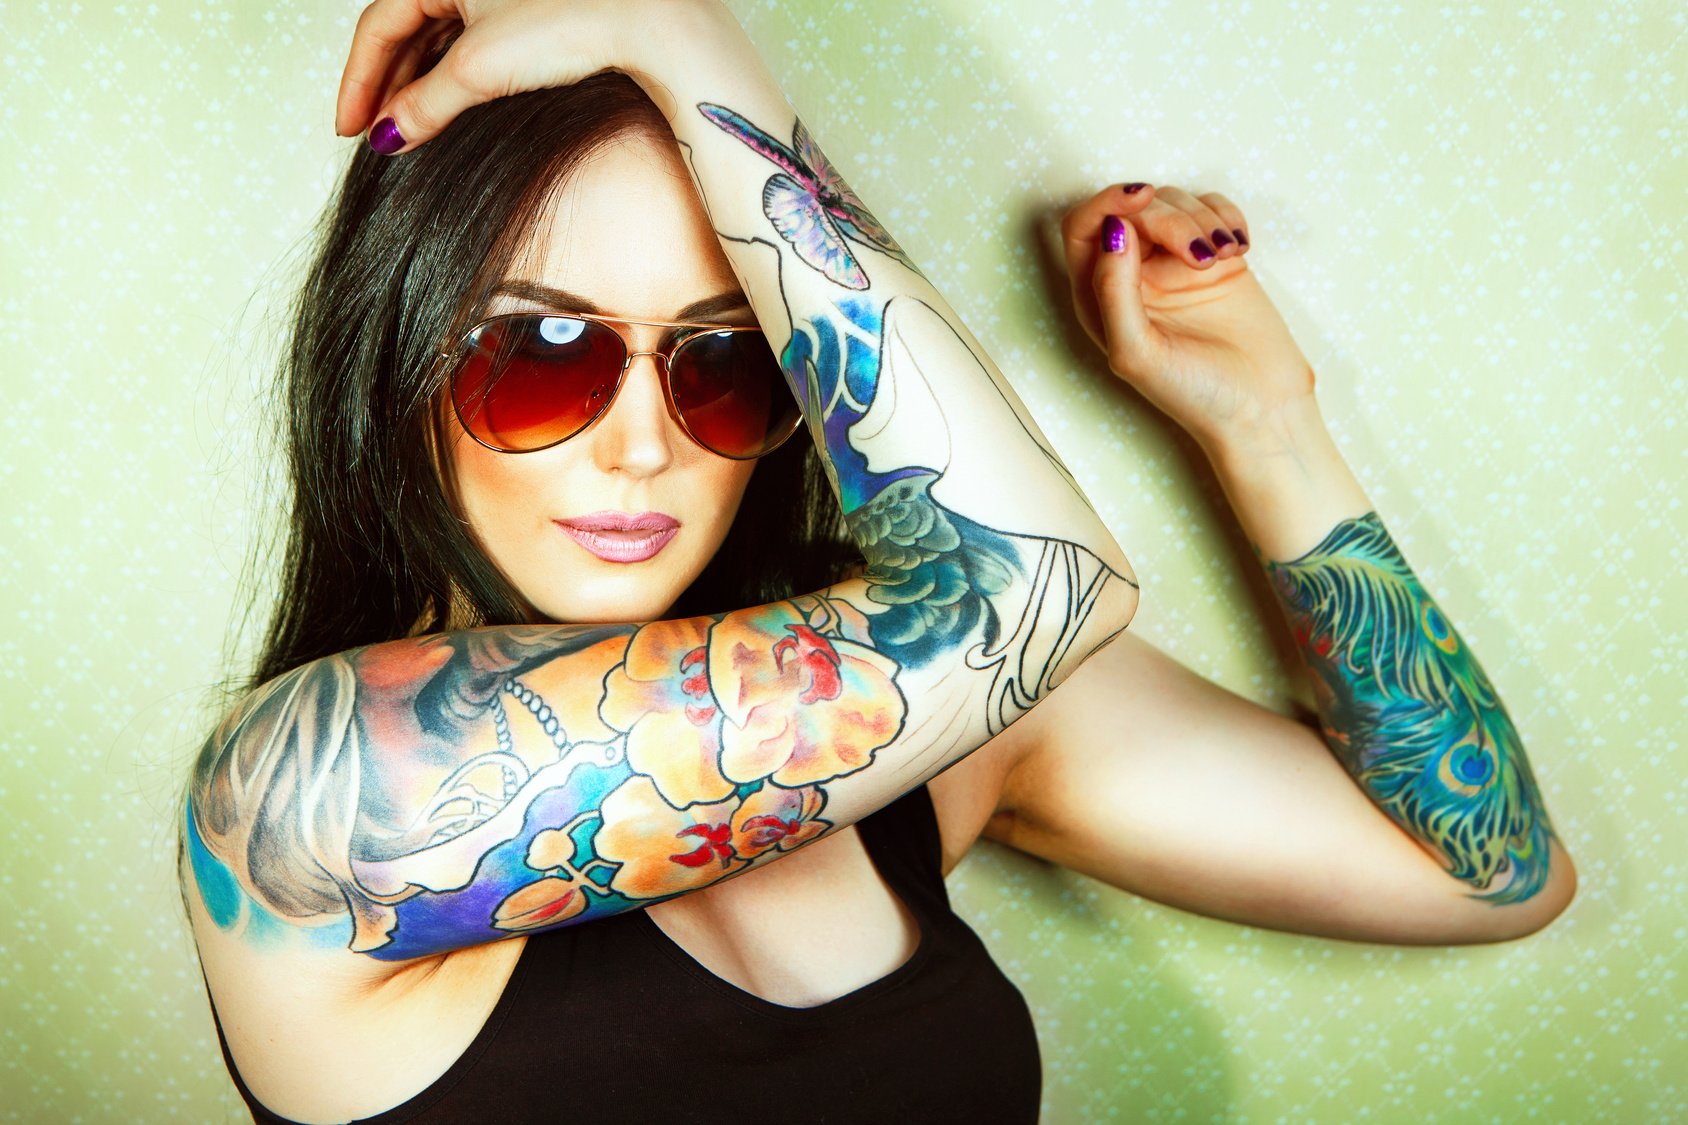 Beautiful girl with stylish make-up and tattooed arms..